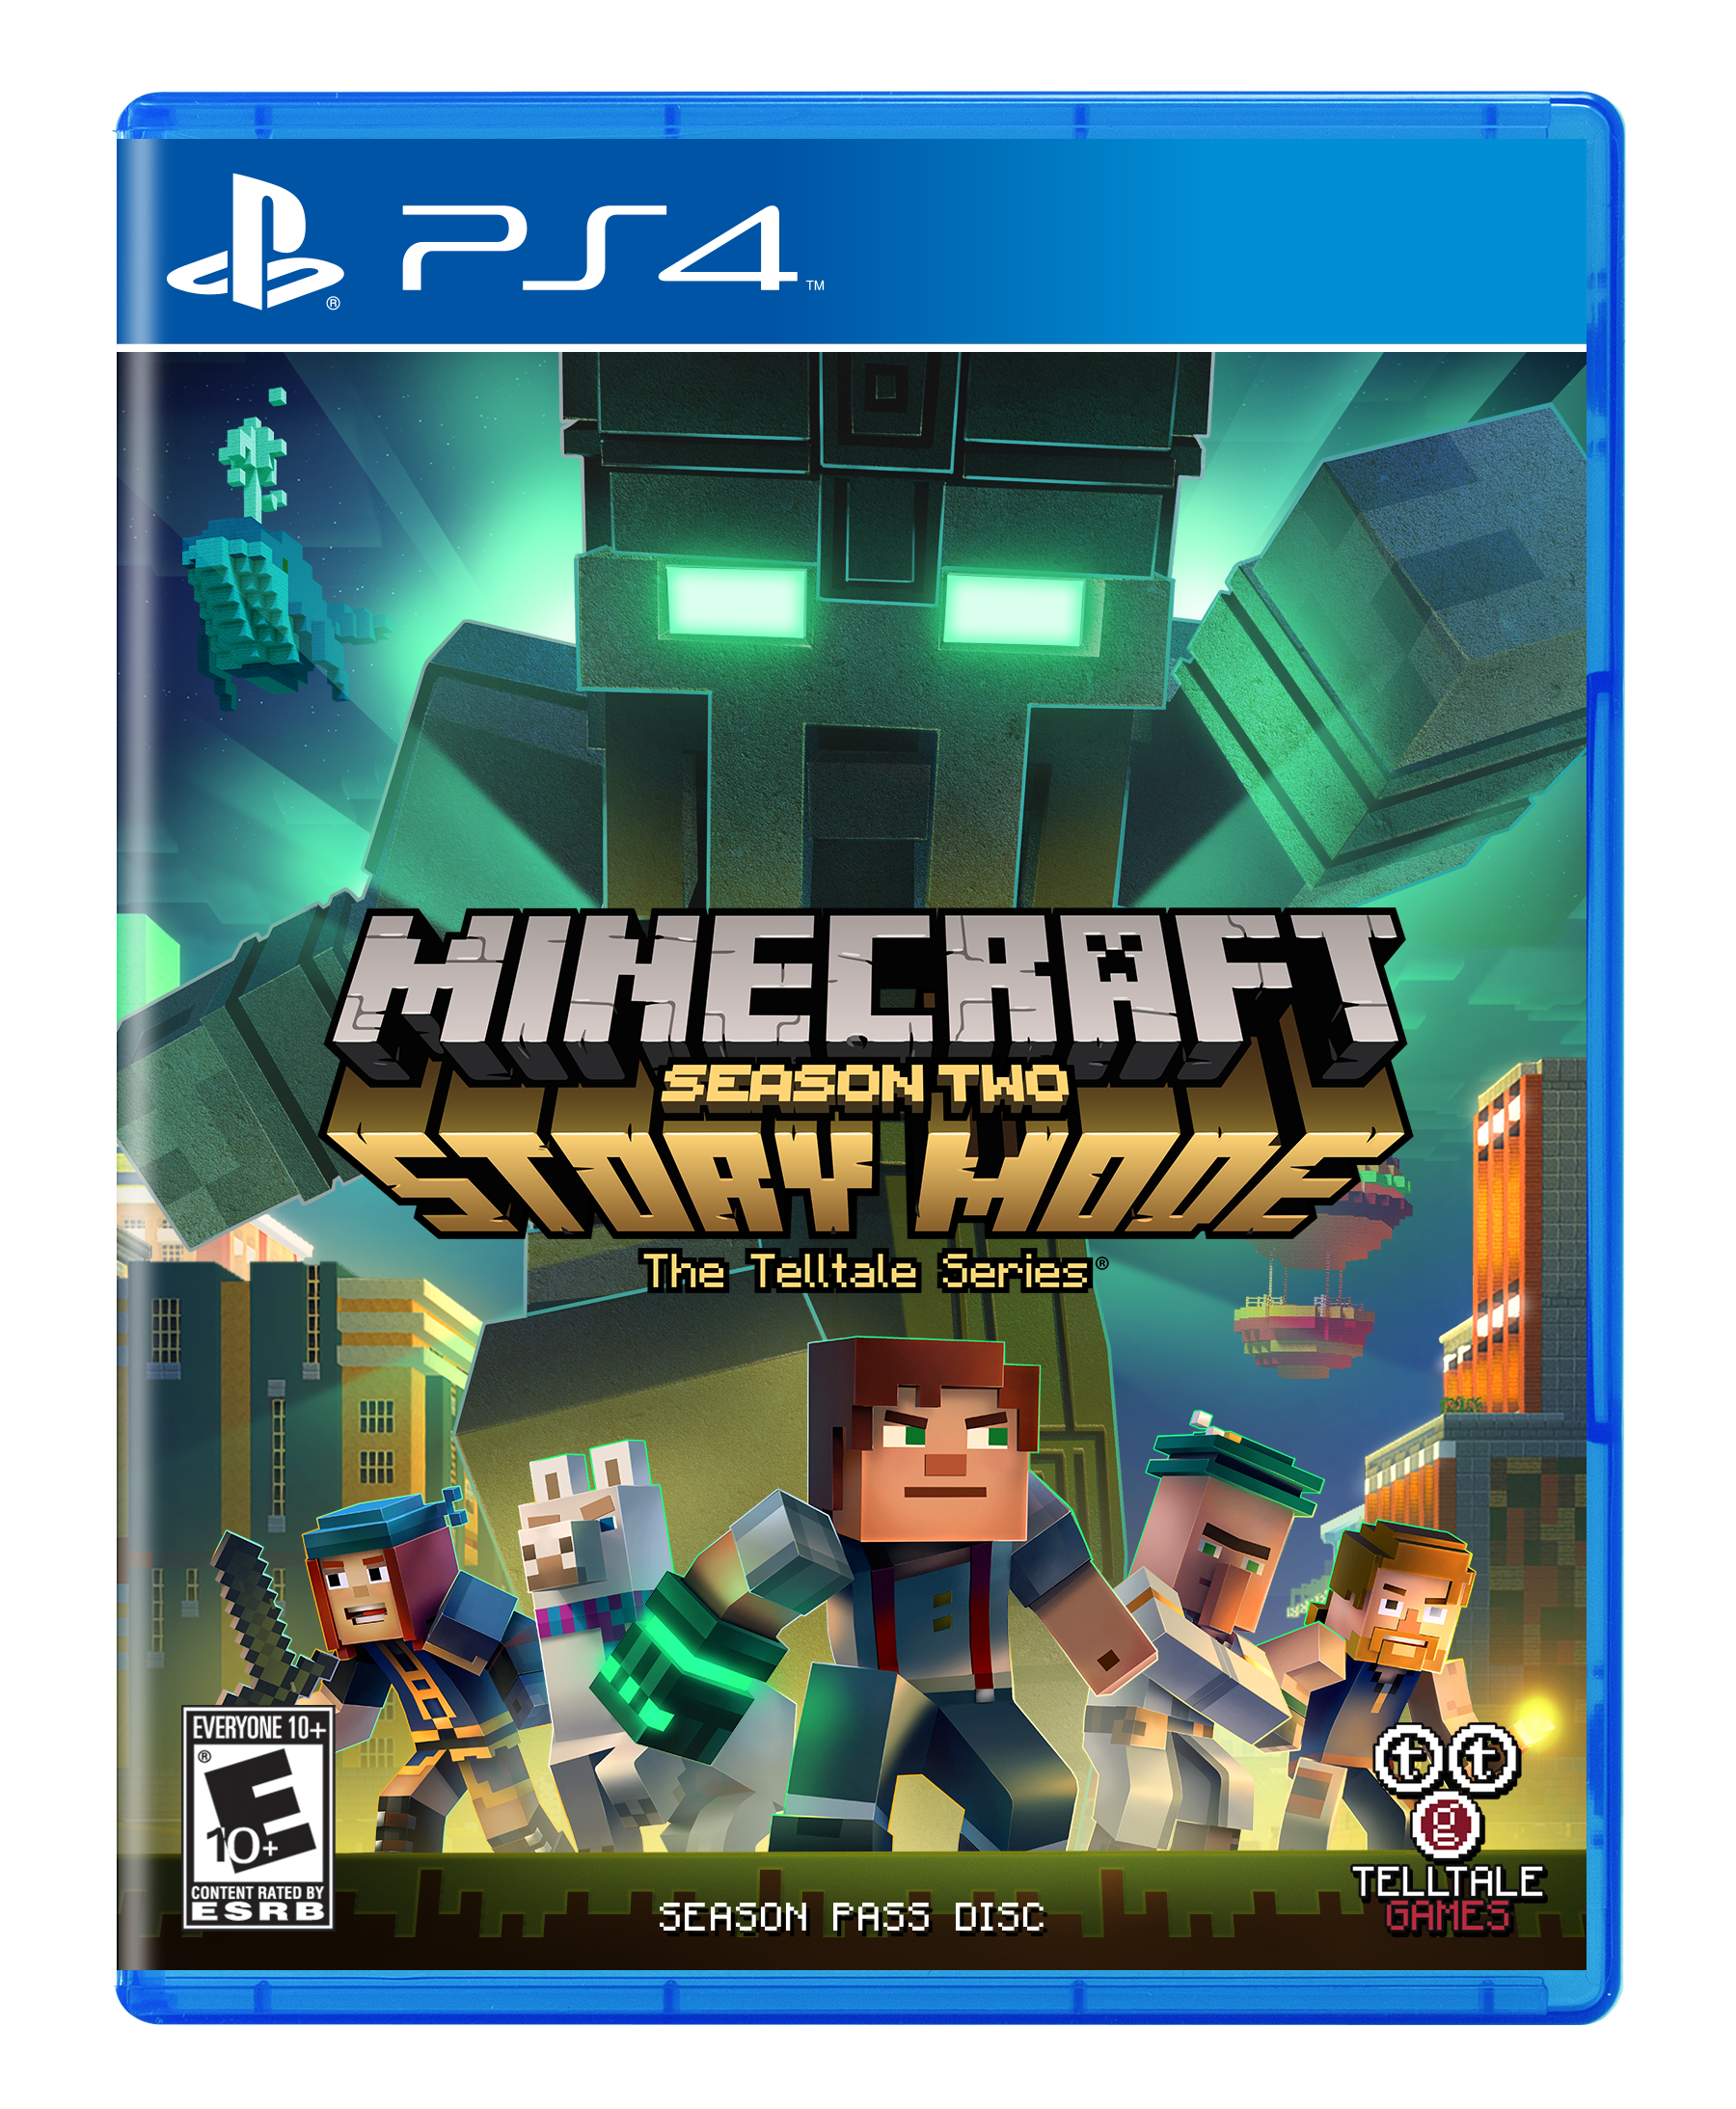 minecraft story mode play store